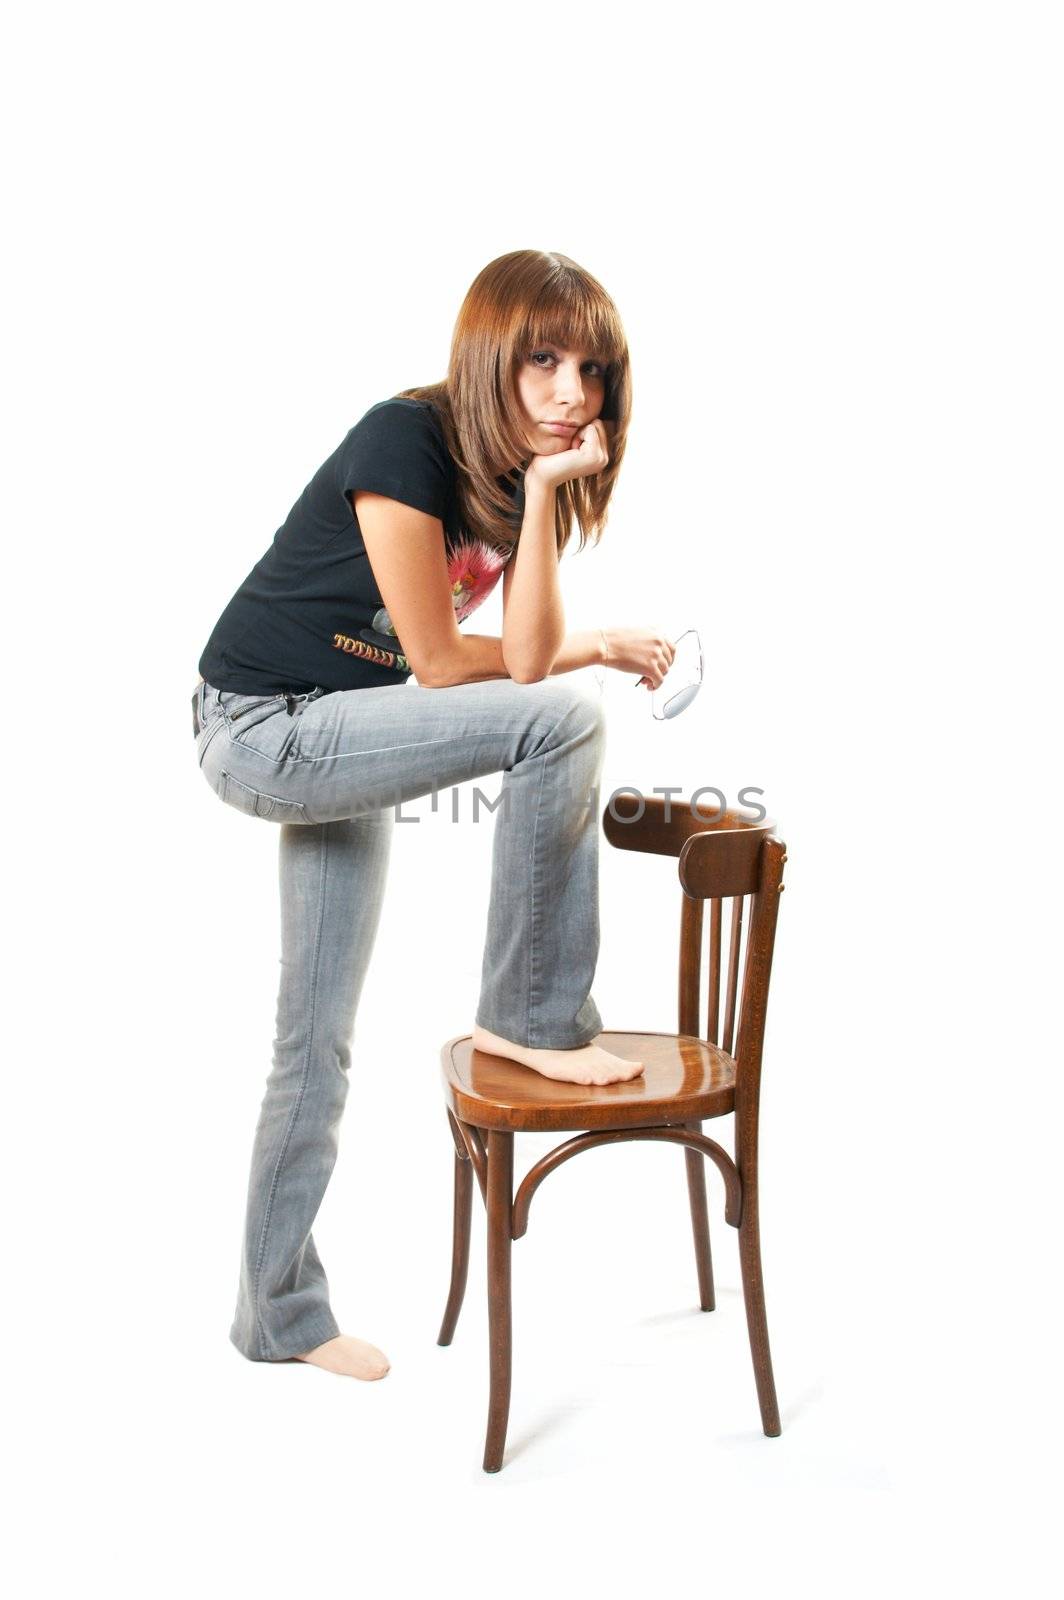 The girl with a chair on a white background 